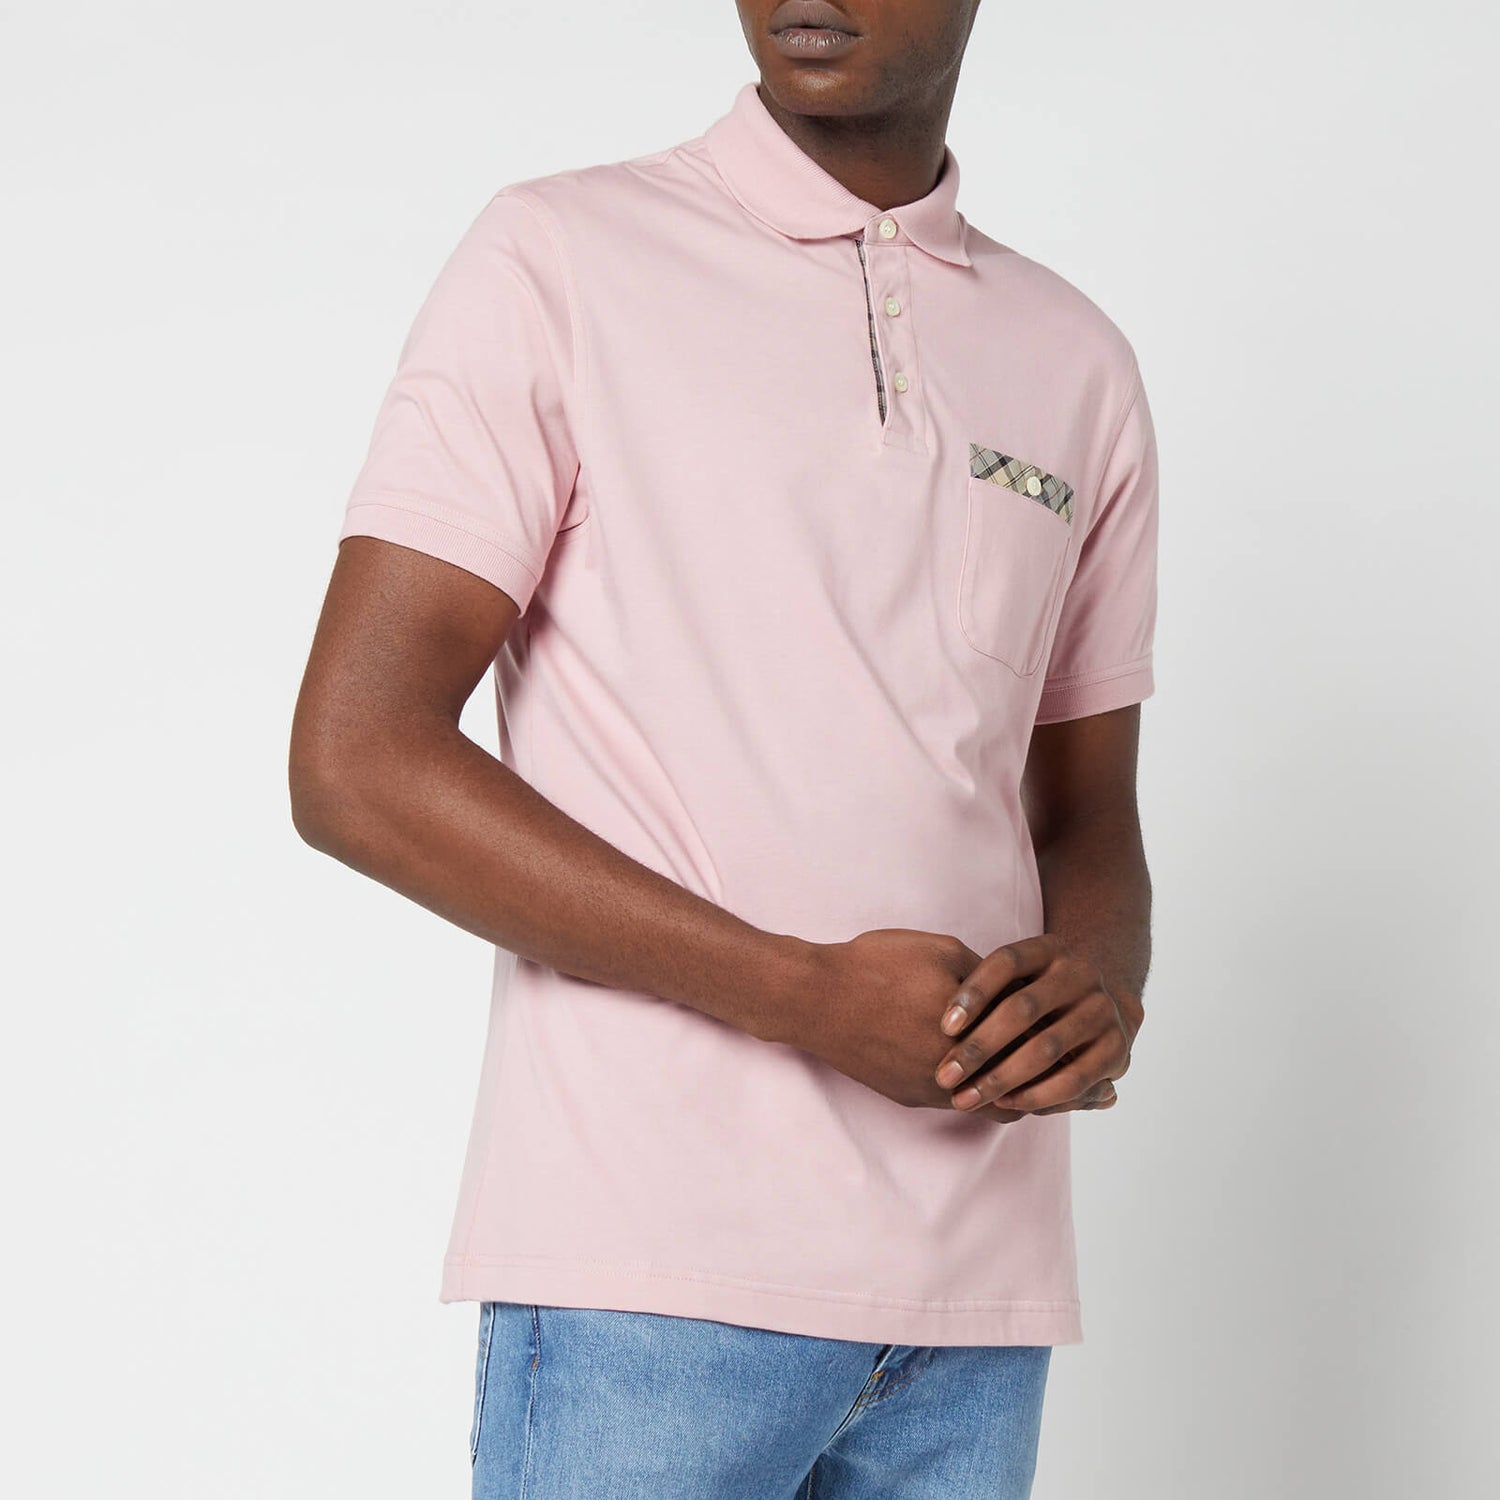 Barbour Heritage Men's Hirst Pocket Polo Shirt - Faded Pink